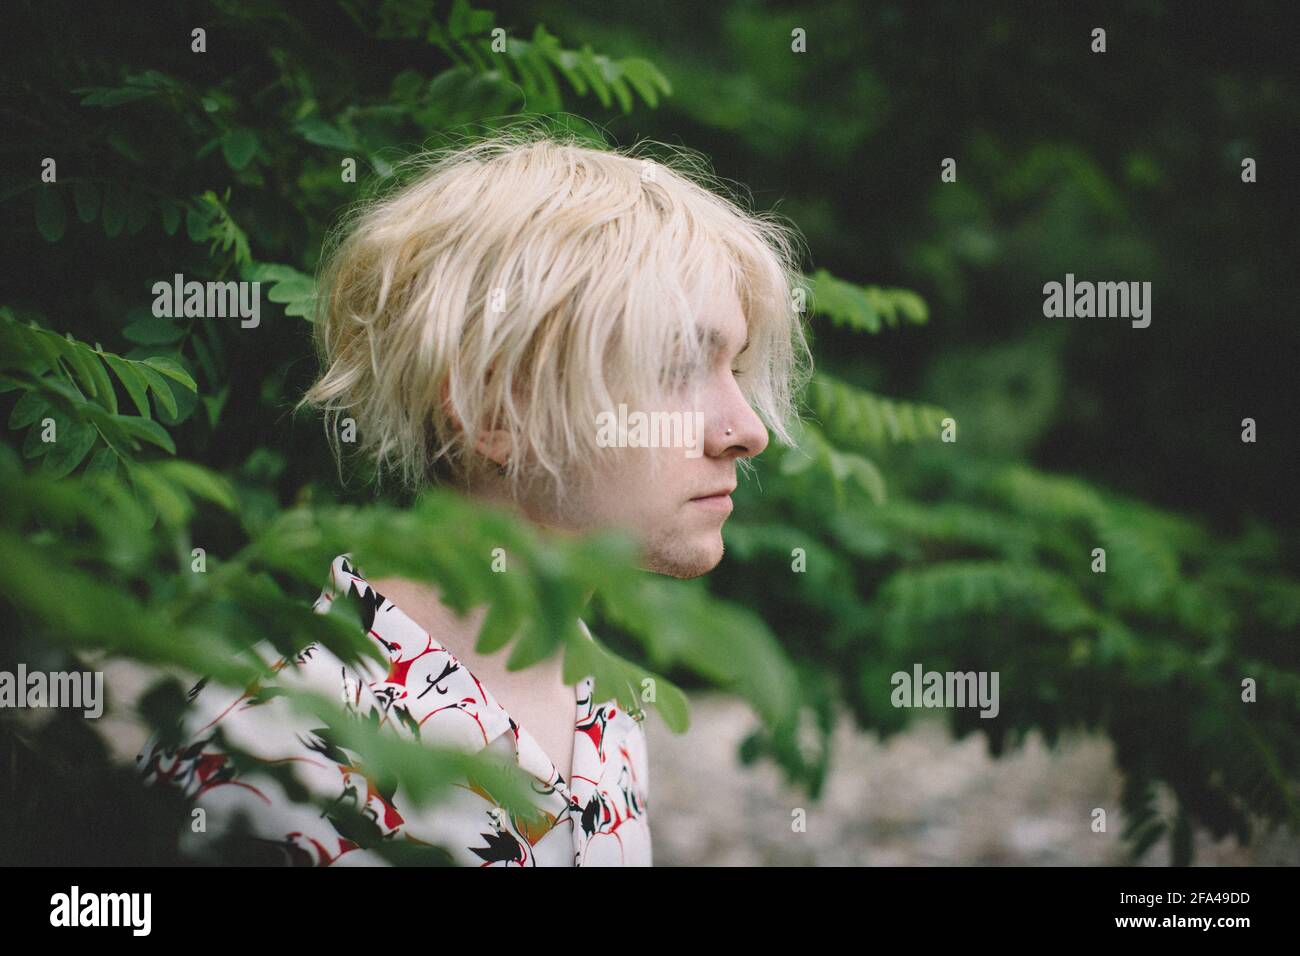 Teen Boy With Bleach Blonde Hair Stands in Profile among Green Leaves Stock Photo